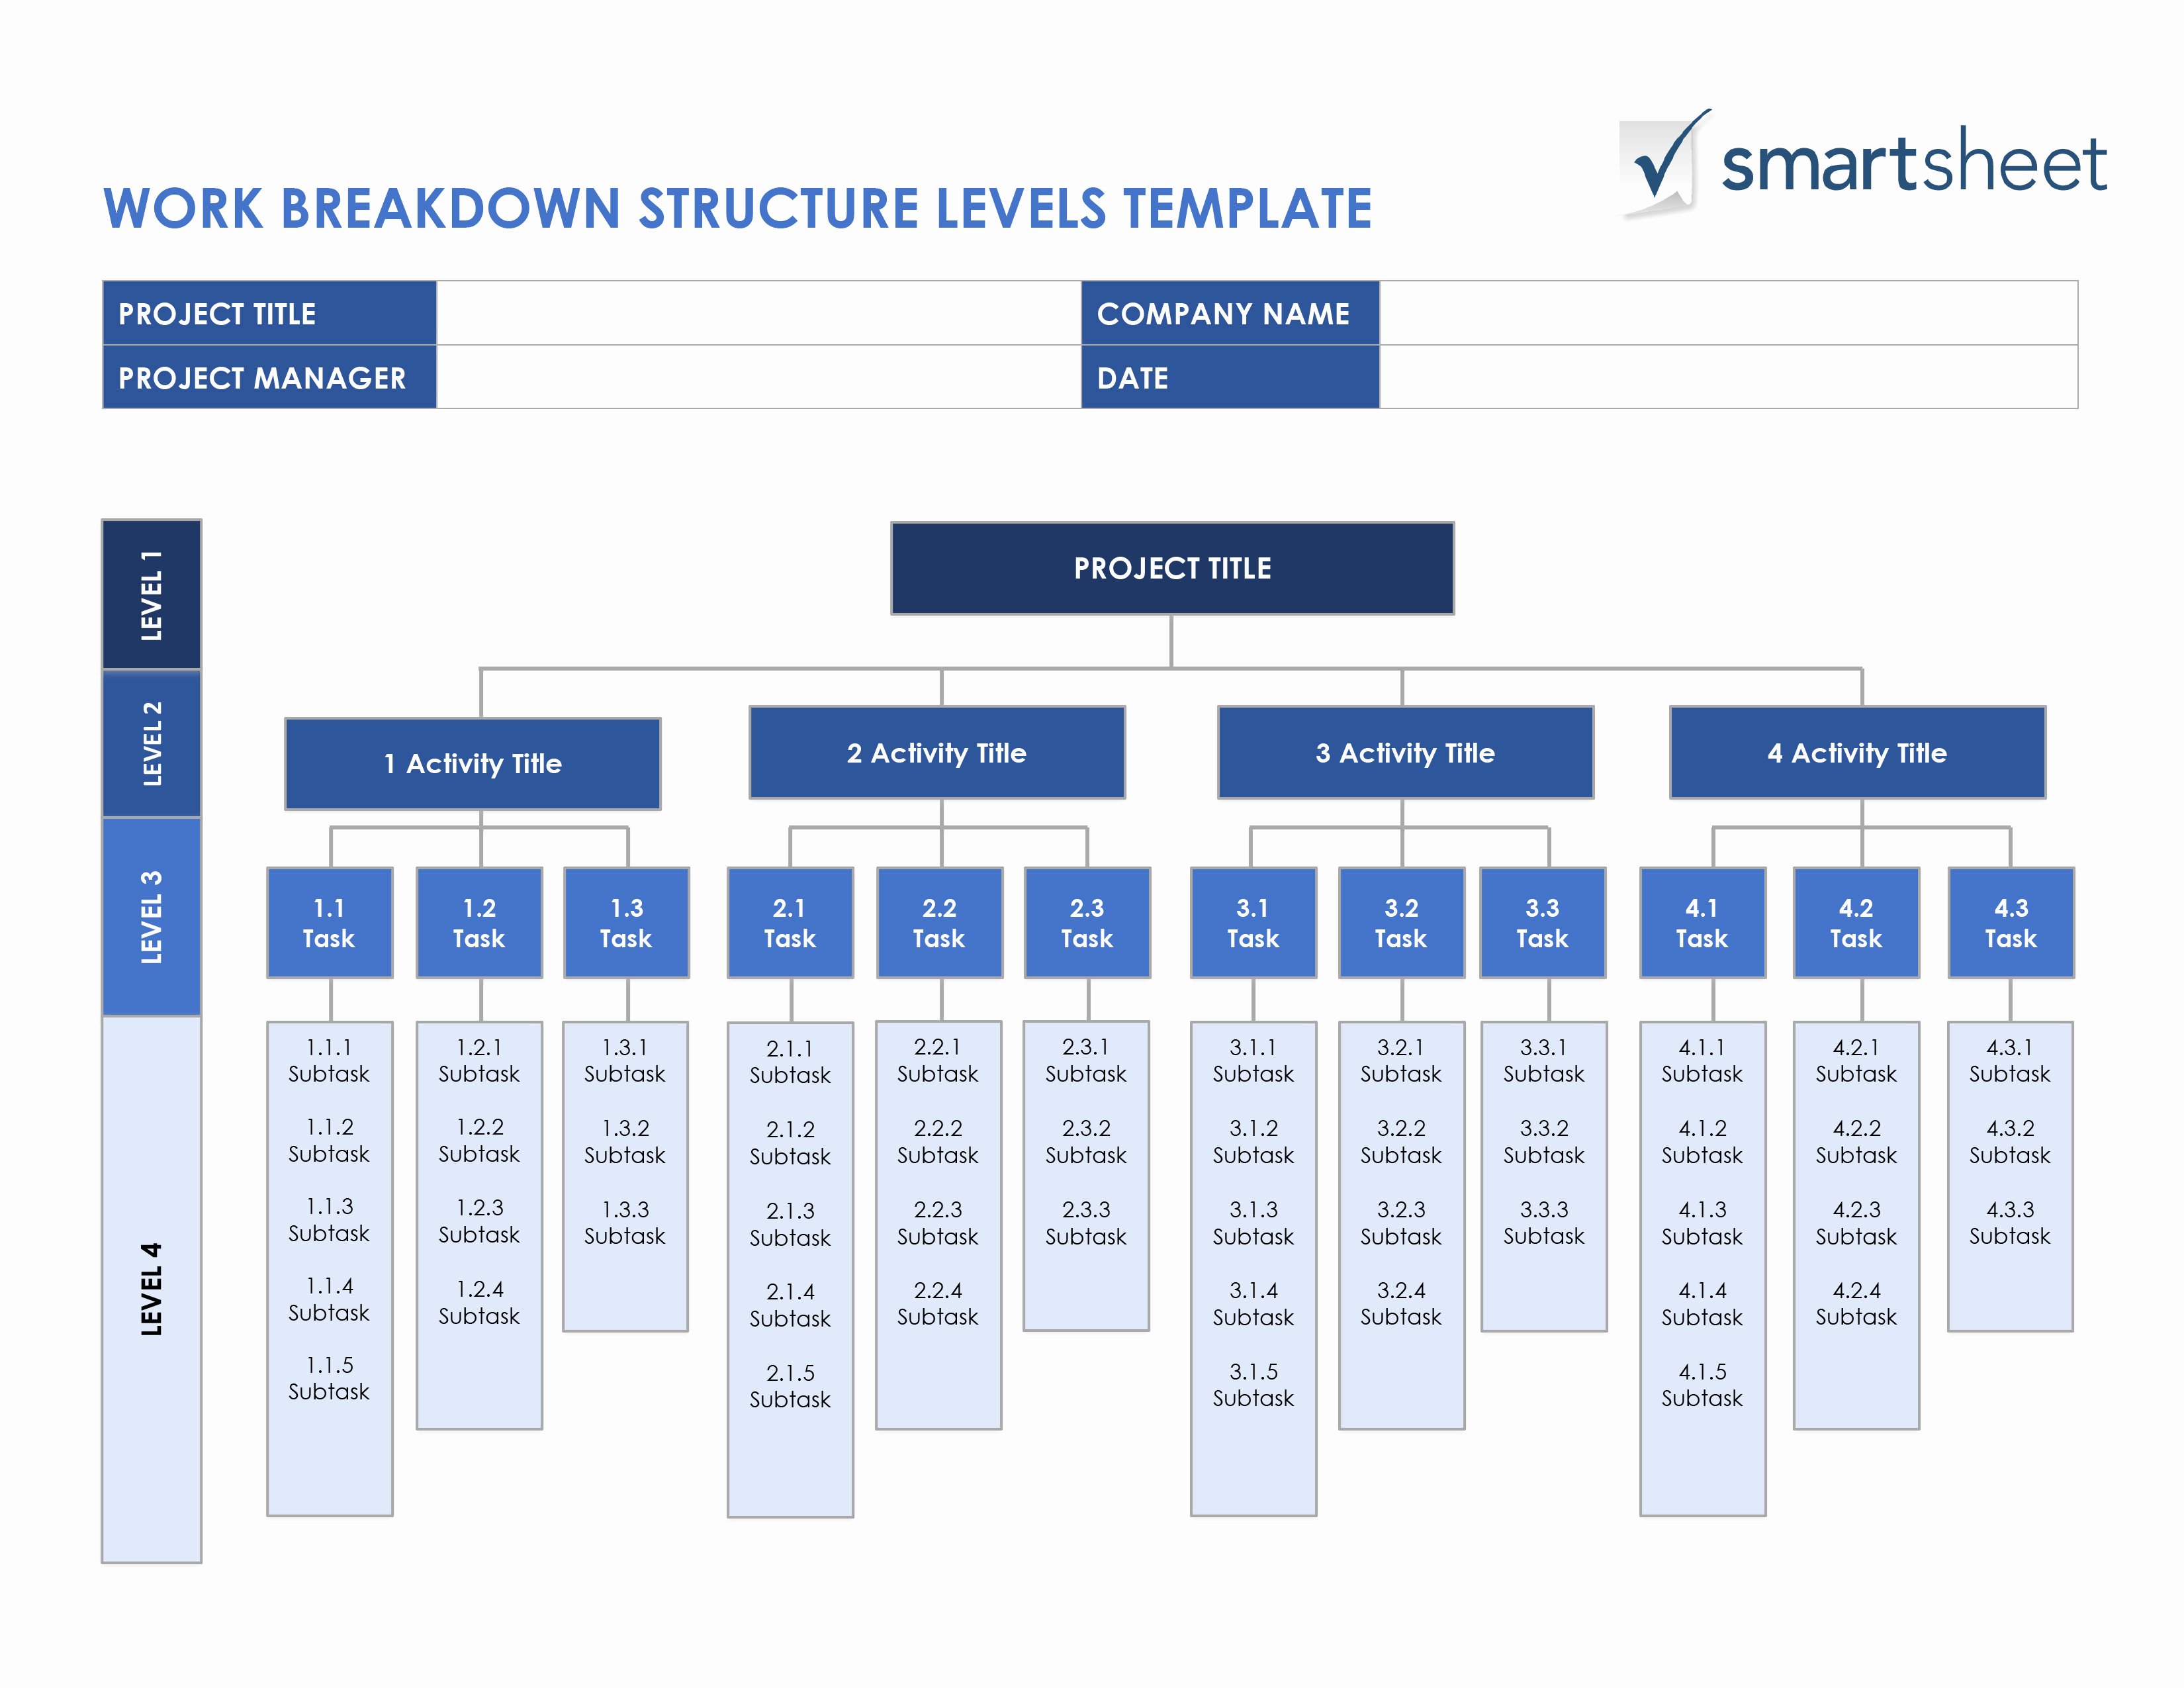 Work Breakdown Structure Template Excel New Work Breakdown Structure Template